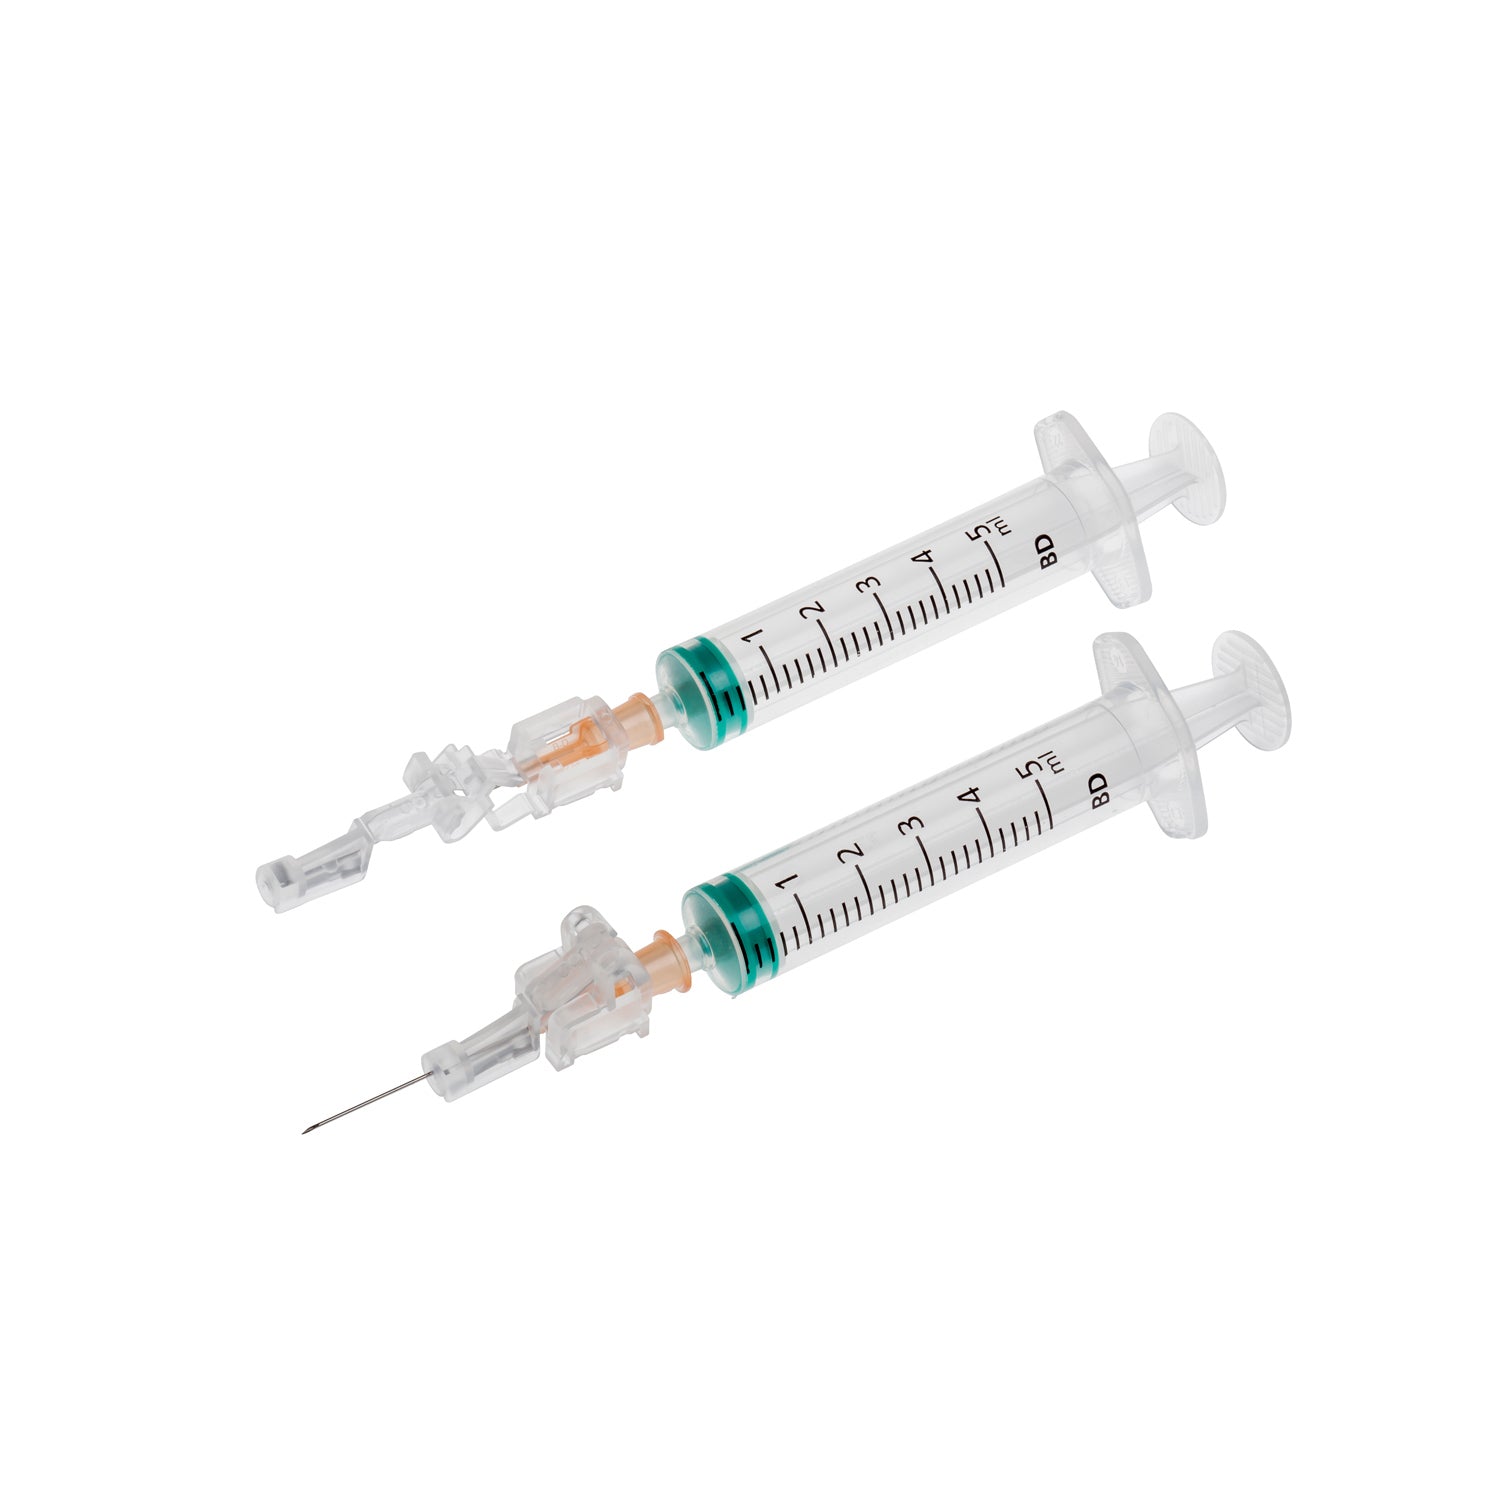 Bd Safety Glide Safety Injection Needles With Luer Attachment 